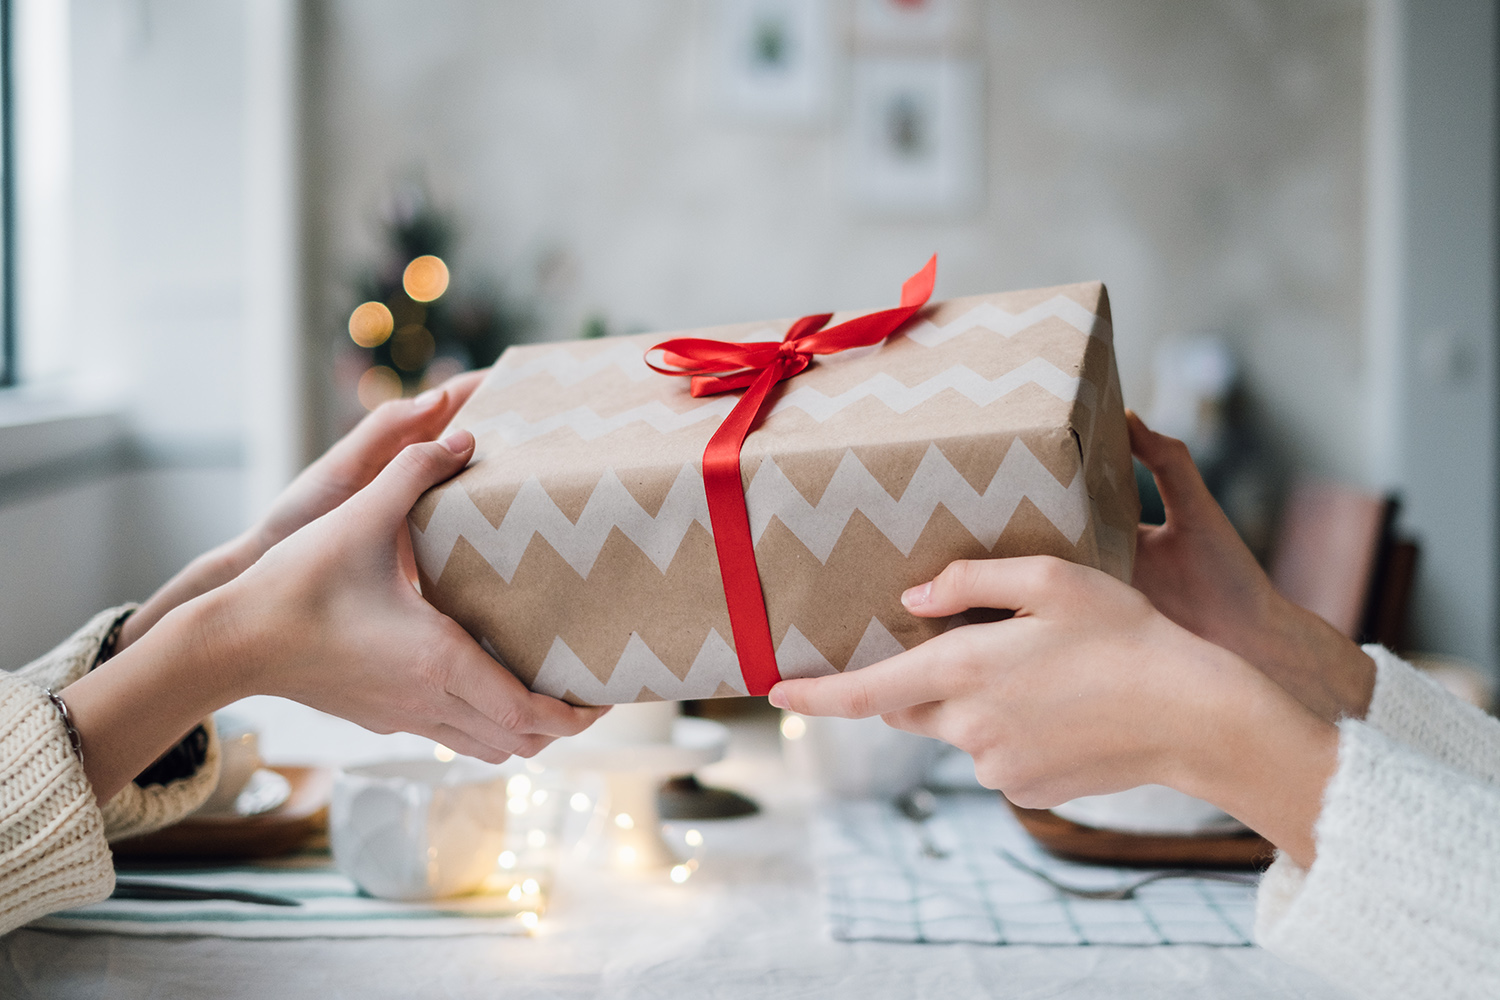 When is the ‘correct’ time to open Christmas presents? | Better Homes